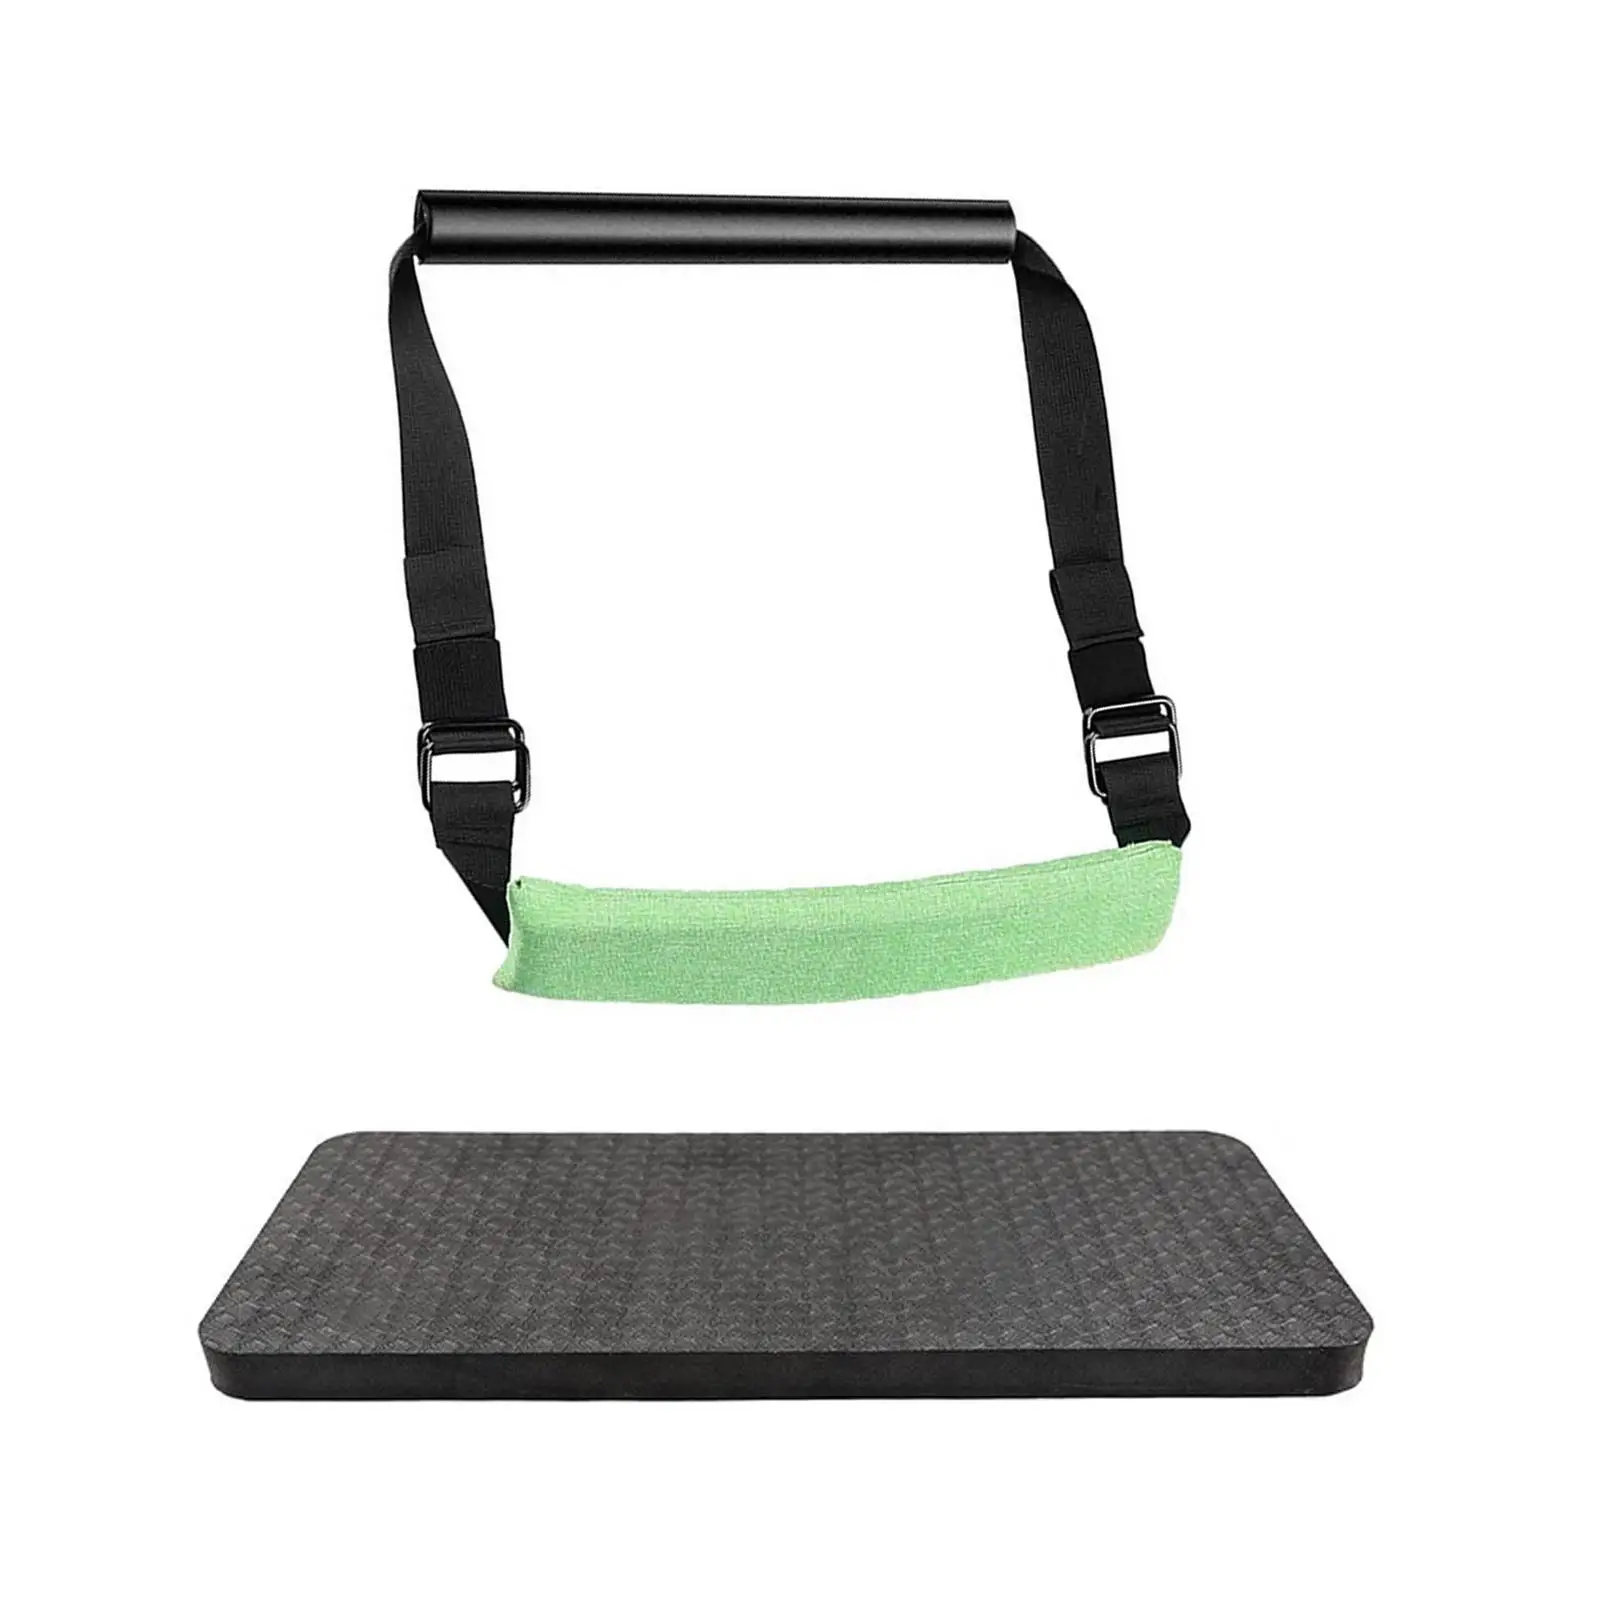 Hamstring Curl Strap for Door Anchor Abdominal Padded Foot Holder for Workout Unisex Adults Home Gym Fitness Strength Training